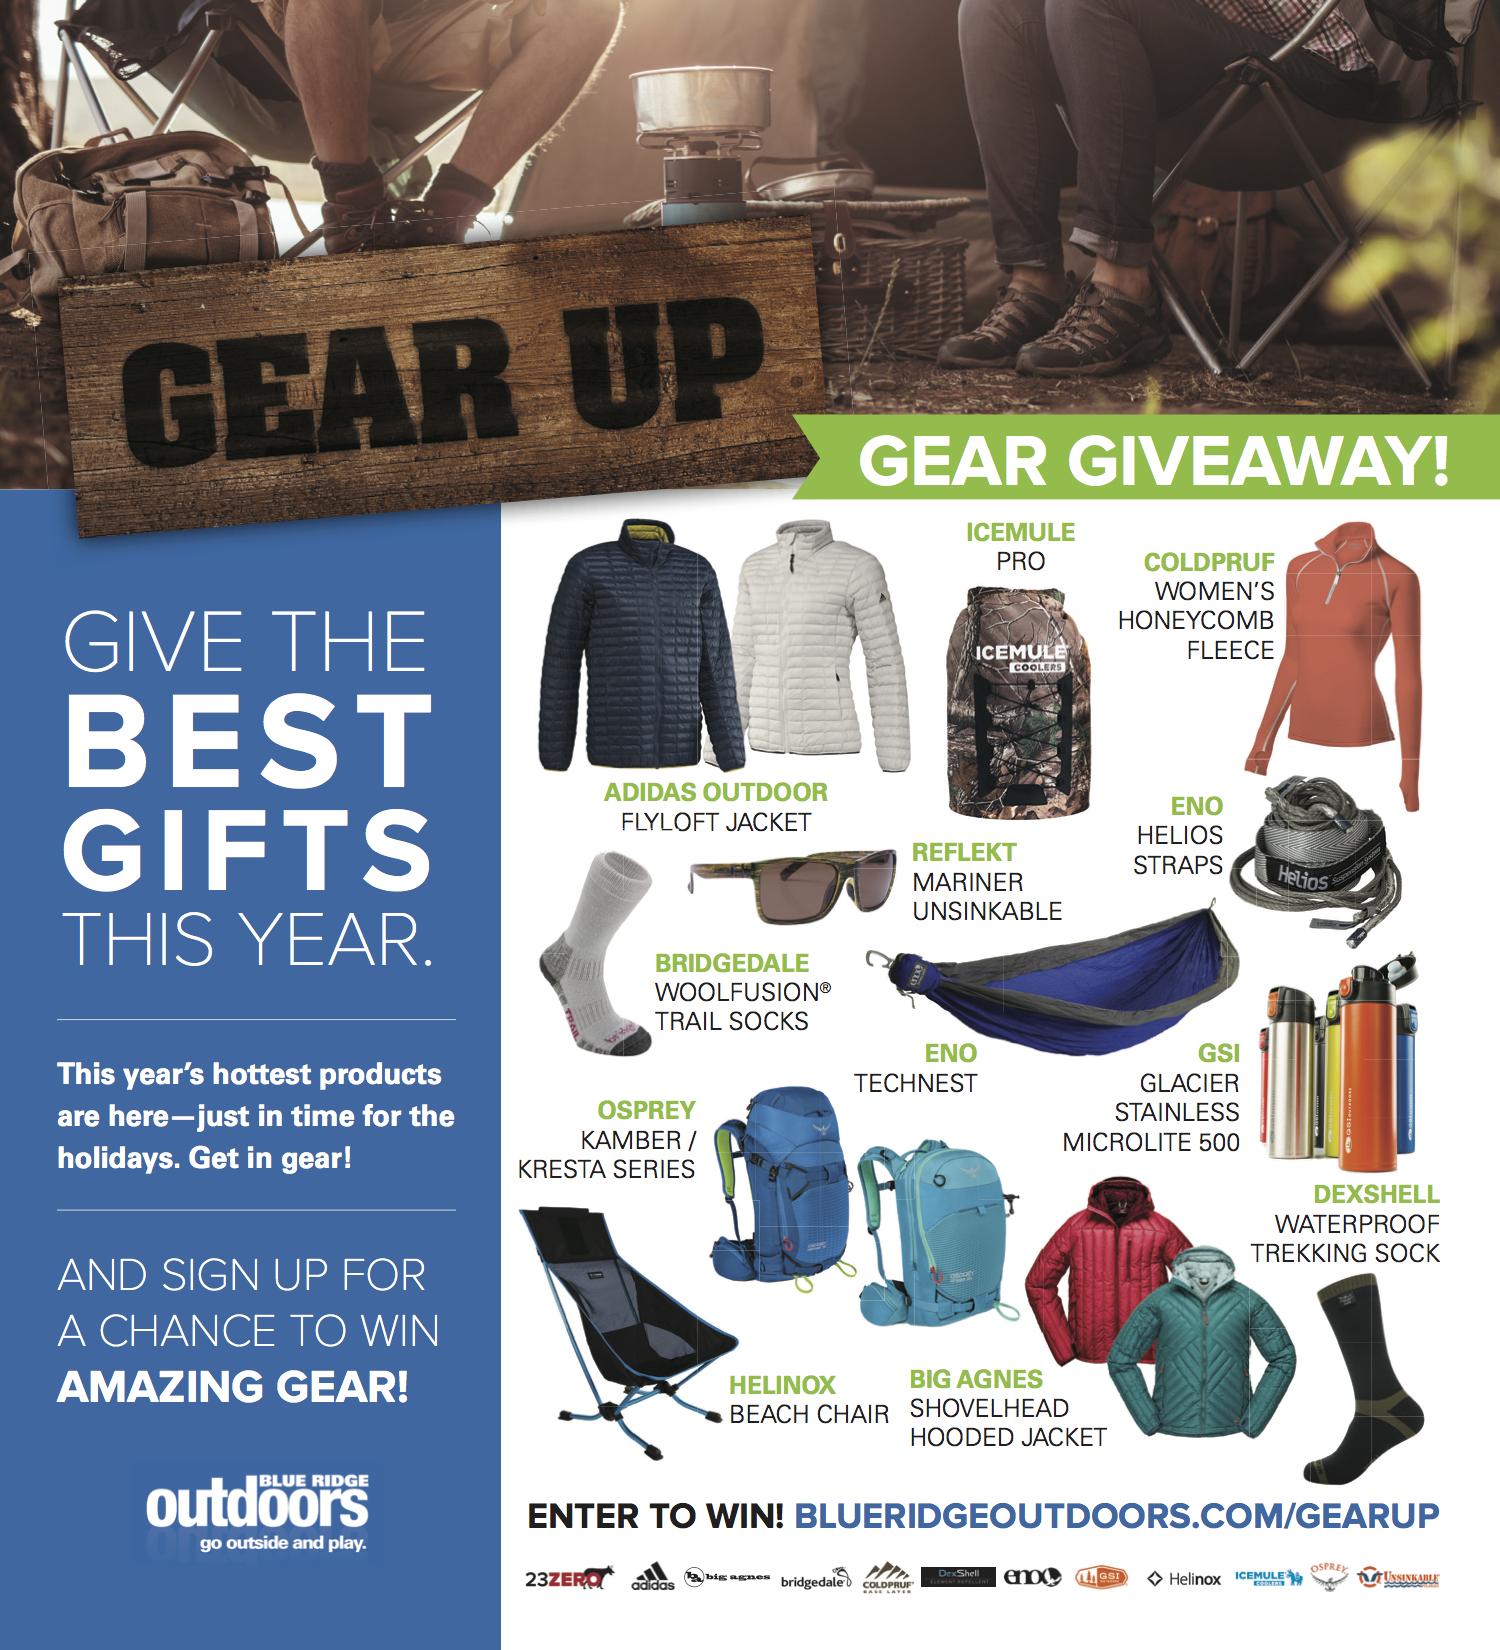 Gear Up Gear Giveaway! - Contests - Blue Ridge Outdoors Magazine